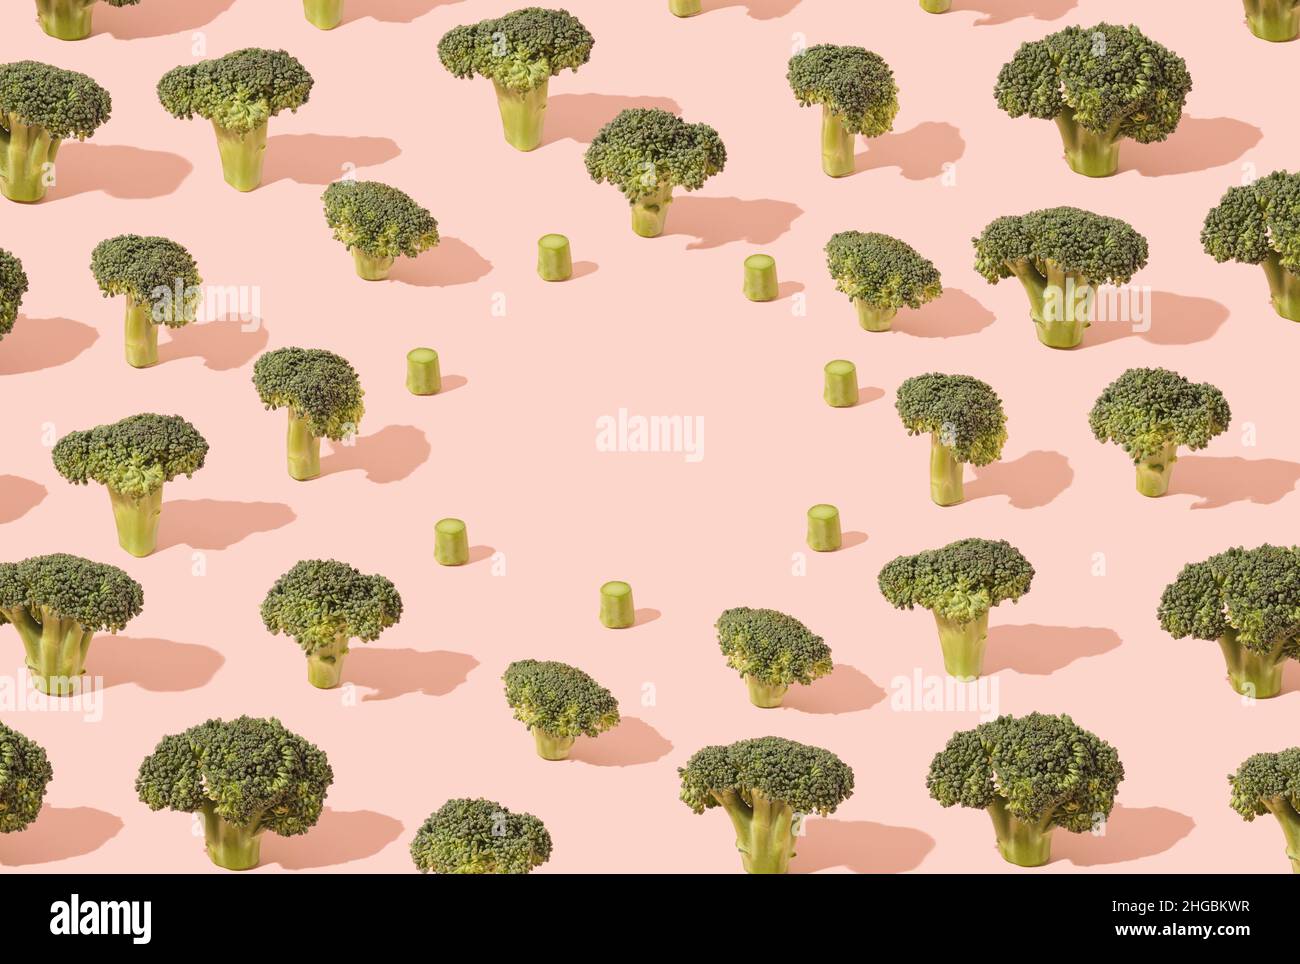 Various broccoli flowers pattern on a pastel pink background. Climate change minimal concept. Stock Photo